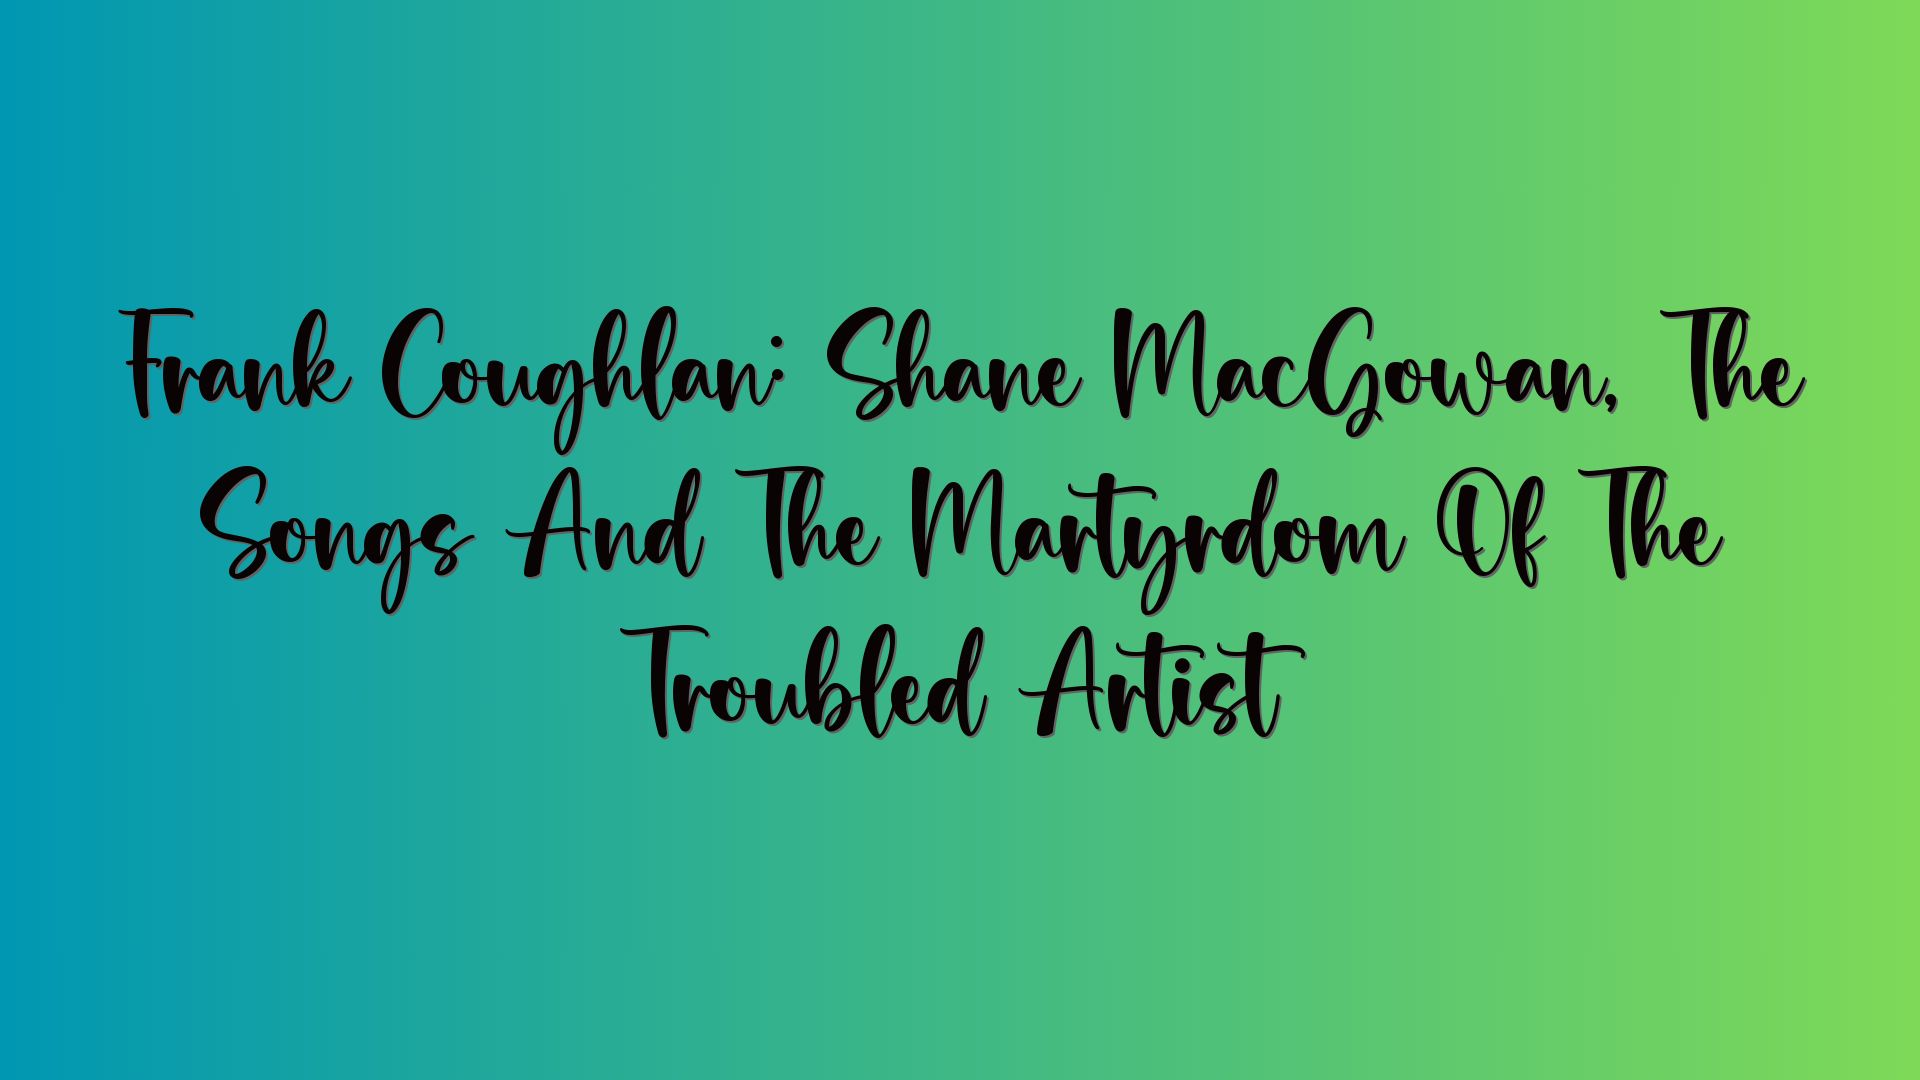 Frank Coughlan: Shane MacGowan, The Songs And The Martyrdom Of The Troubled Artist